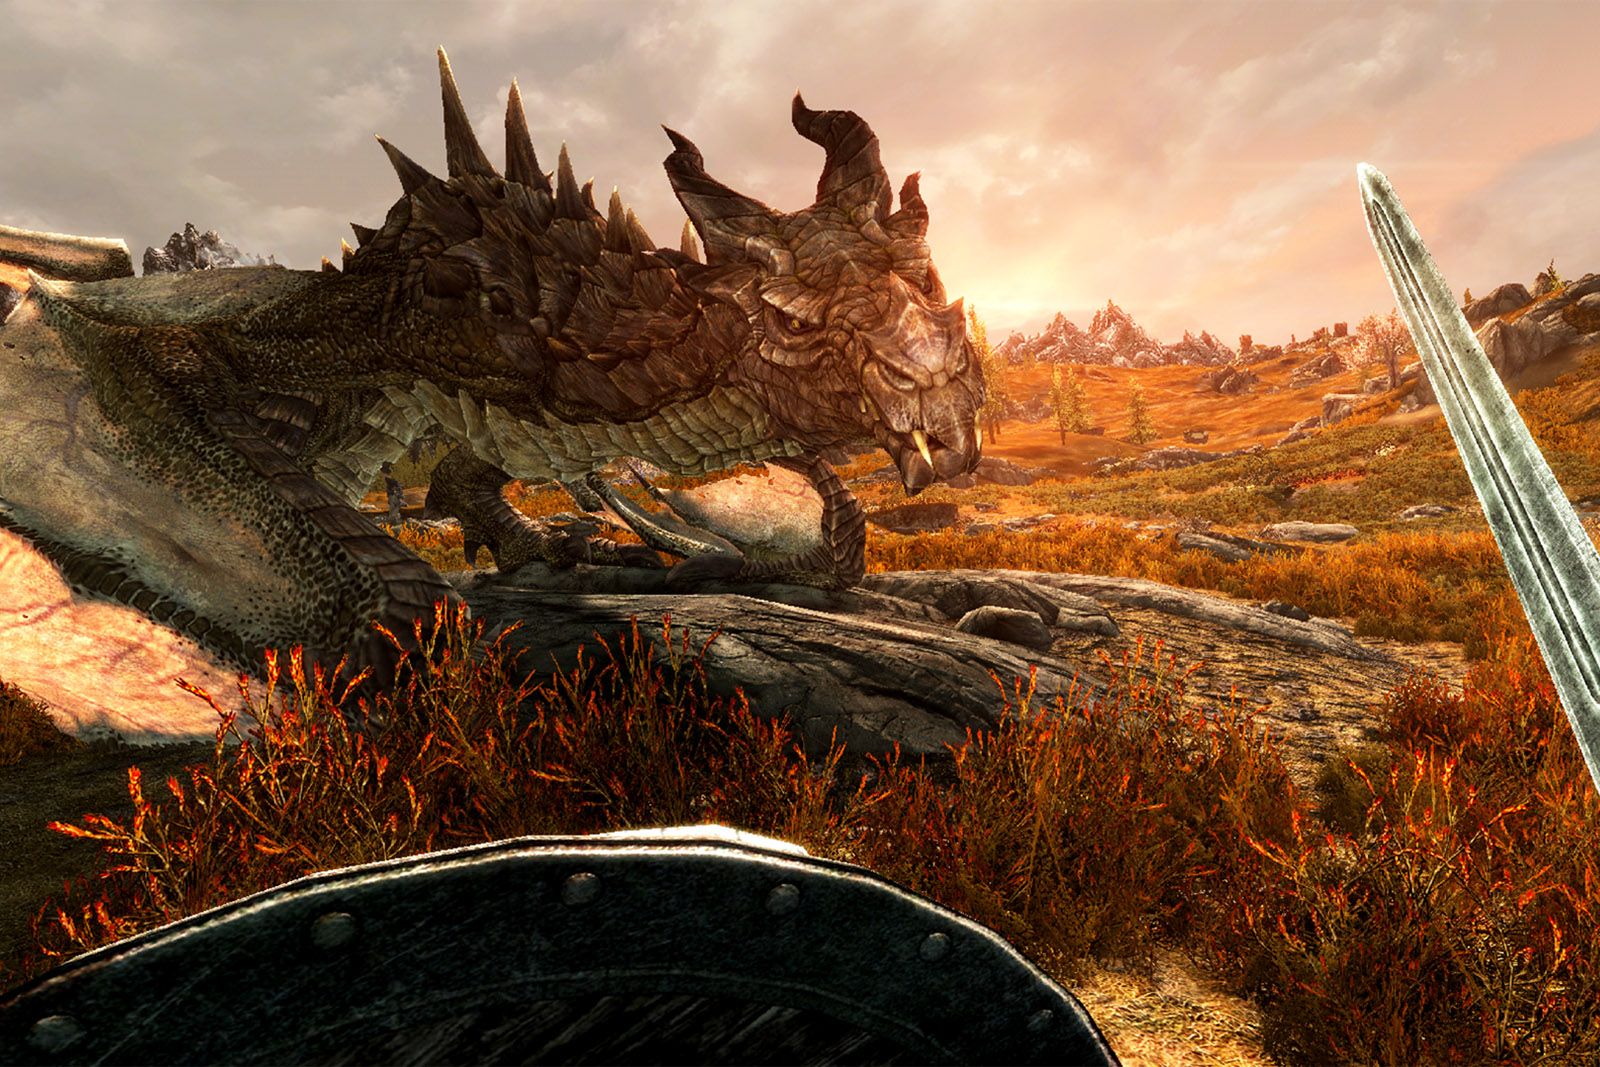 Skyrim Vr Review The Best Version Of Skyrim Yet image 1